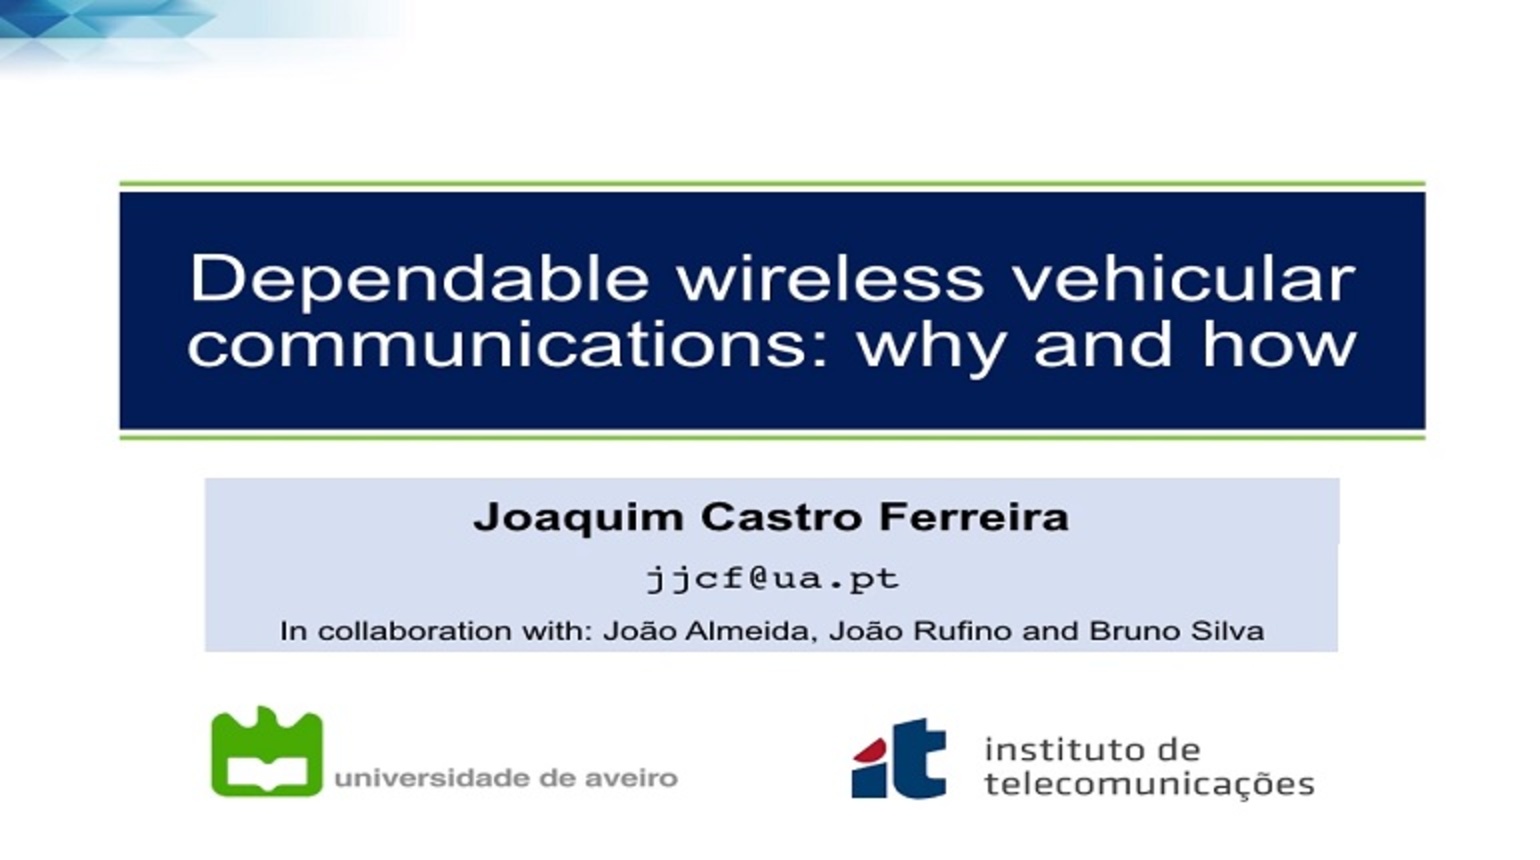 Video - Dependable wireless vehicular communications: why and how